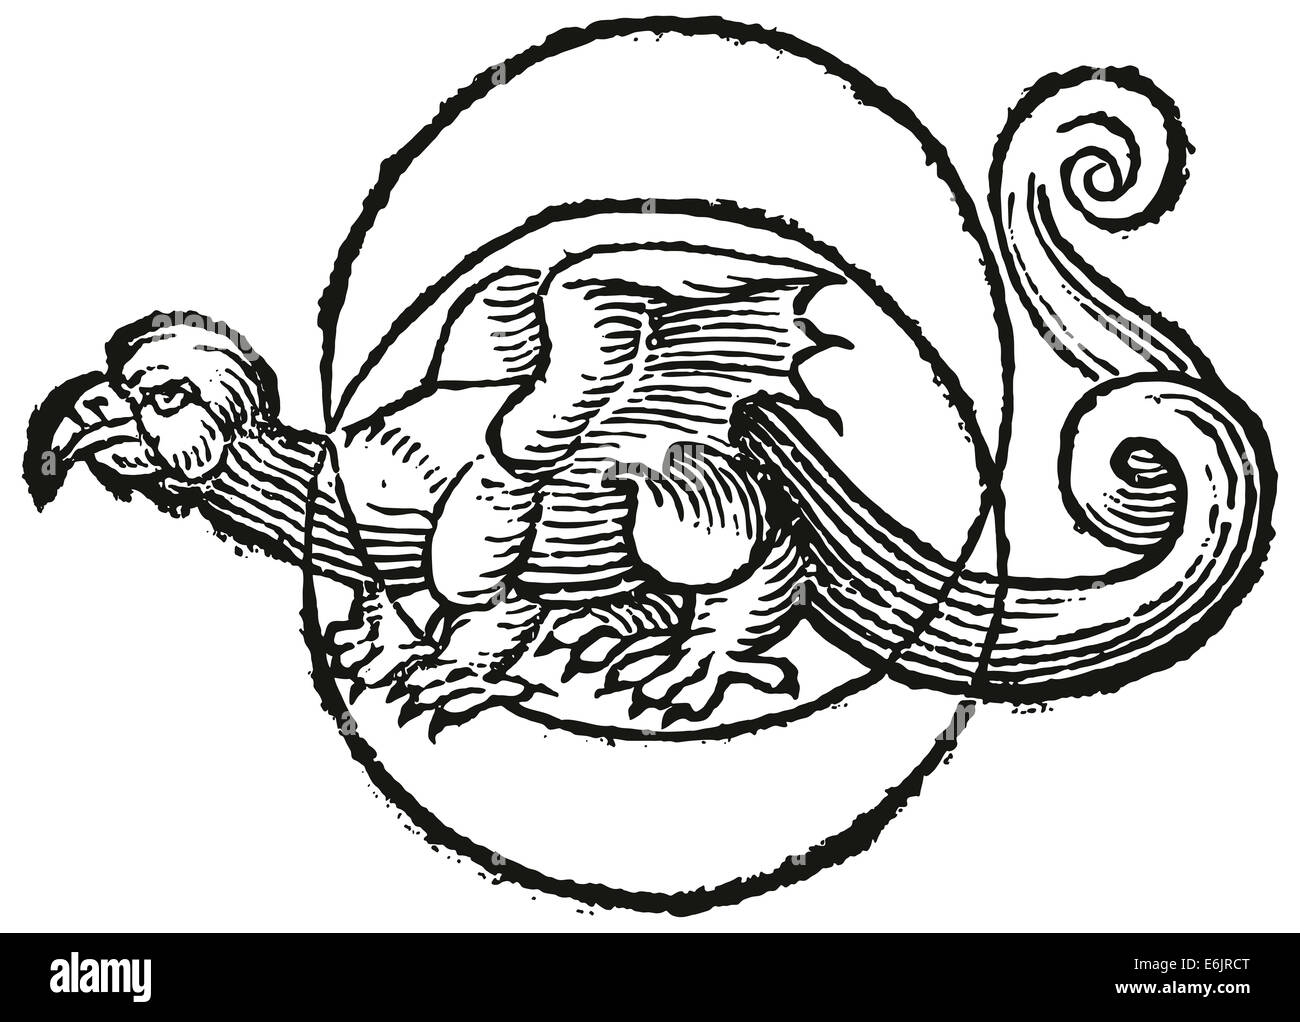 Moon Dragon in the center of two circles. Woodcut illustration. Stock Photo